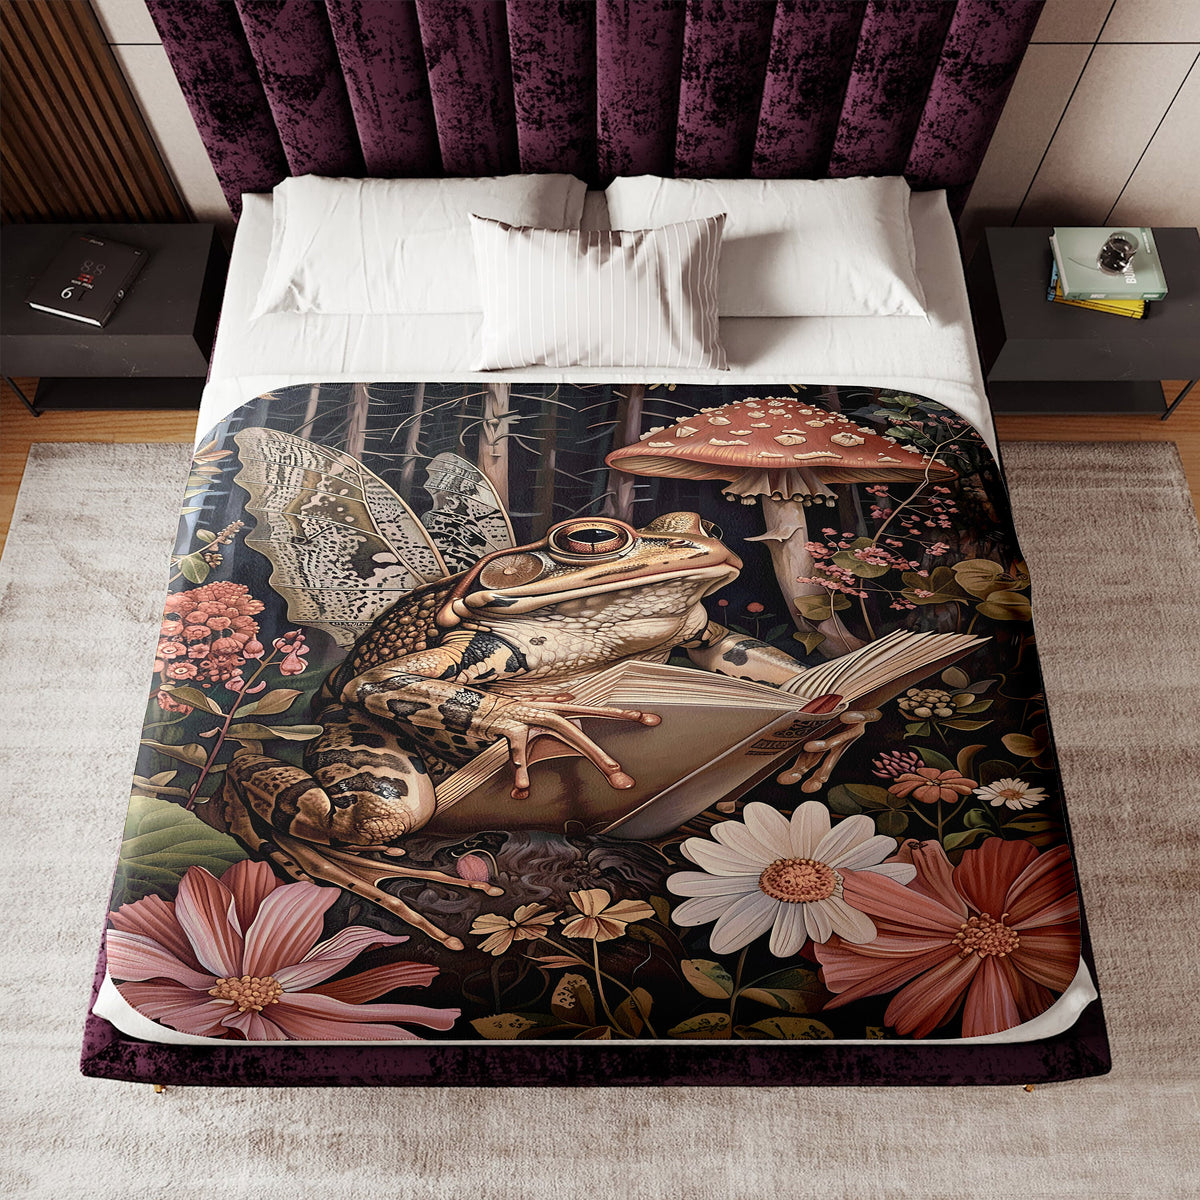 a bed with a picture of a frog on it